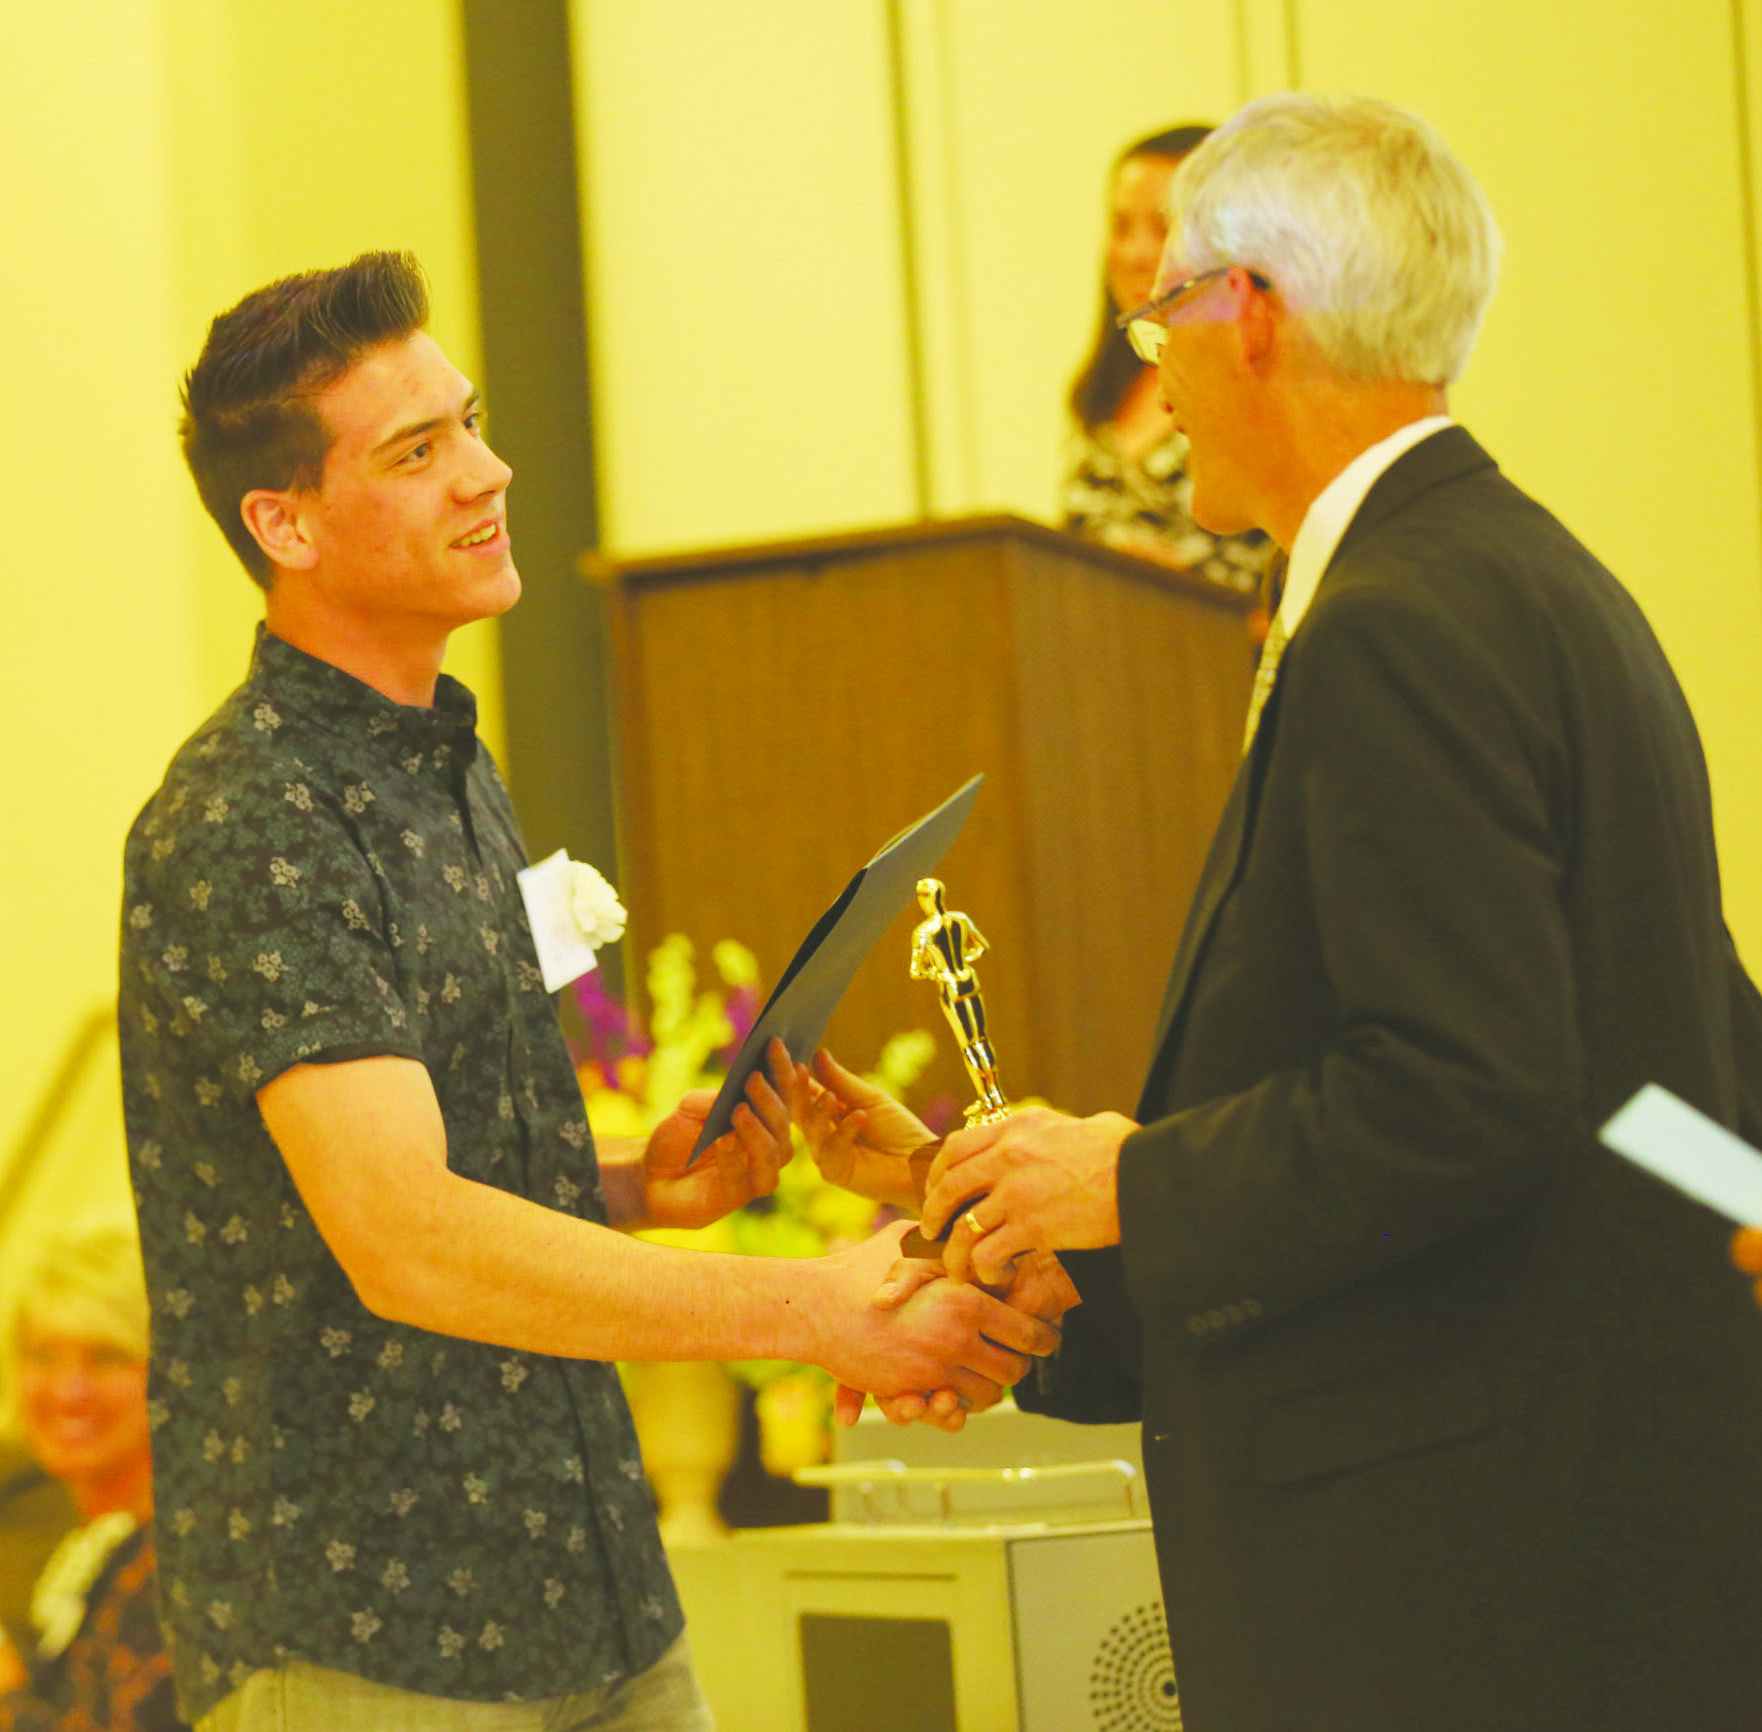 Jesse Hall, Adams County Outstanding Student, left, receives his award from Richard Seas, Superintendent of the Adams County/Ohio Valley School District.